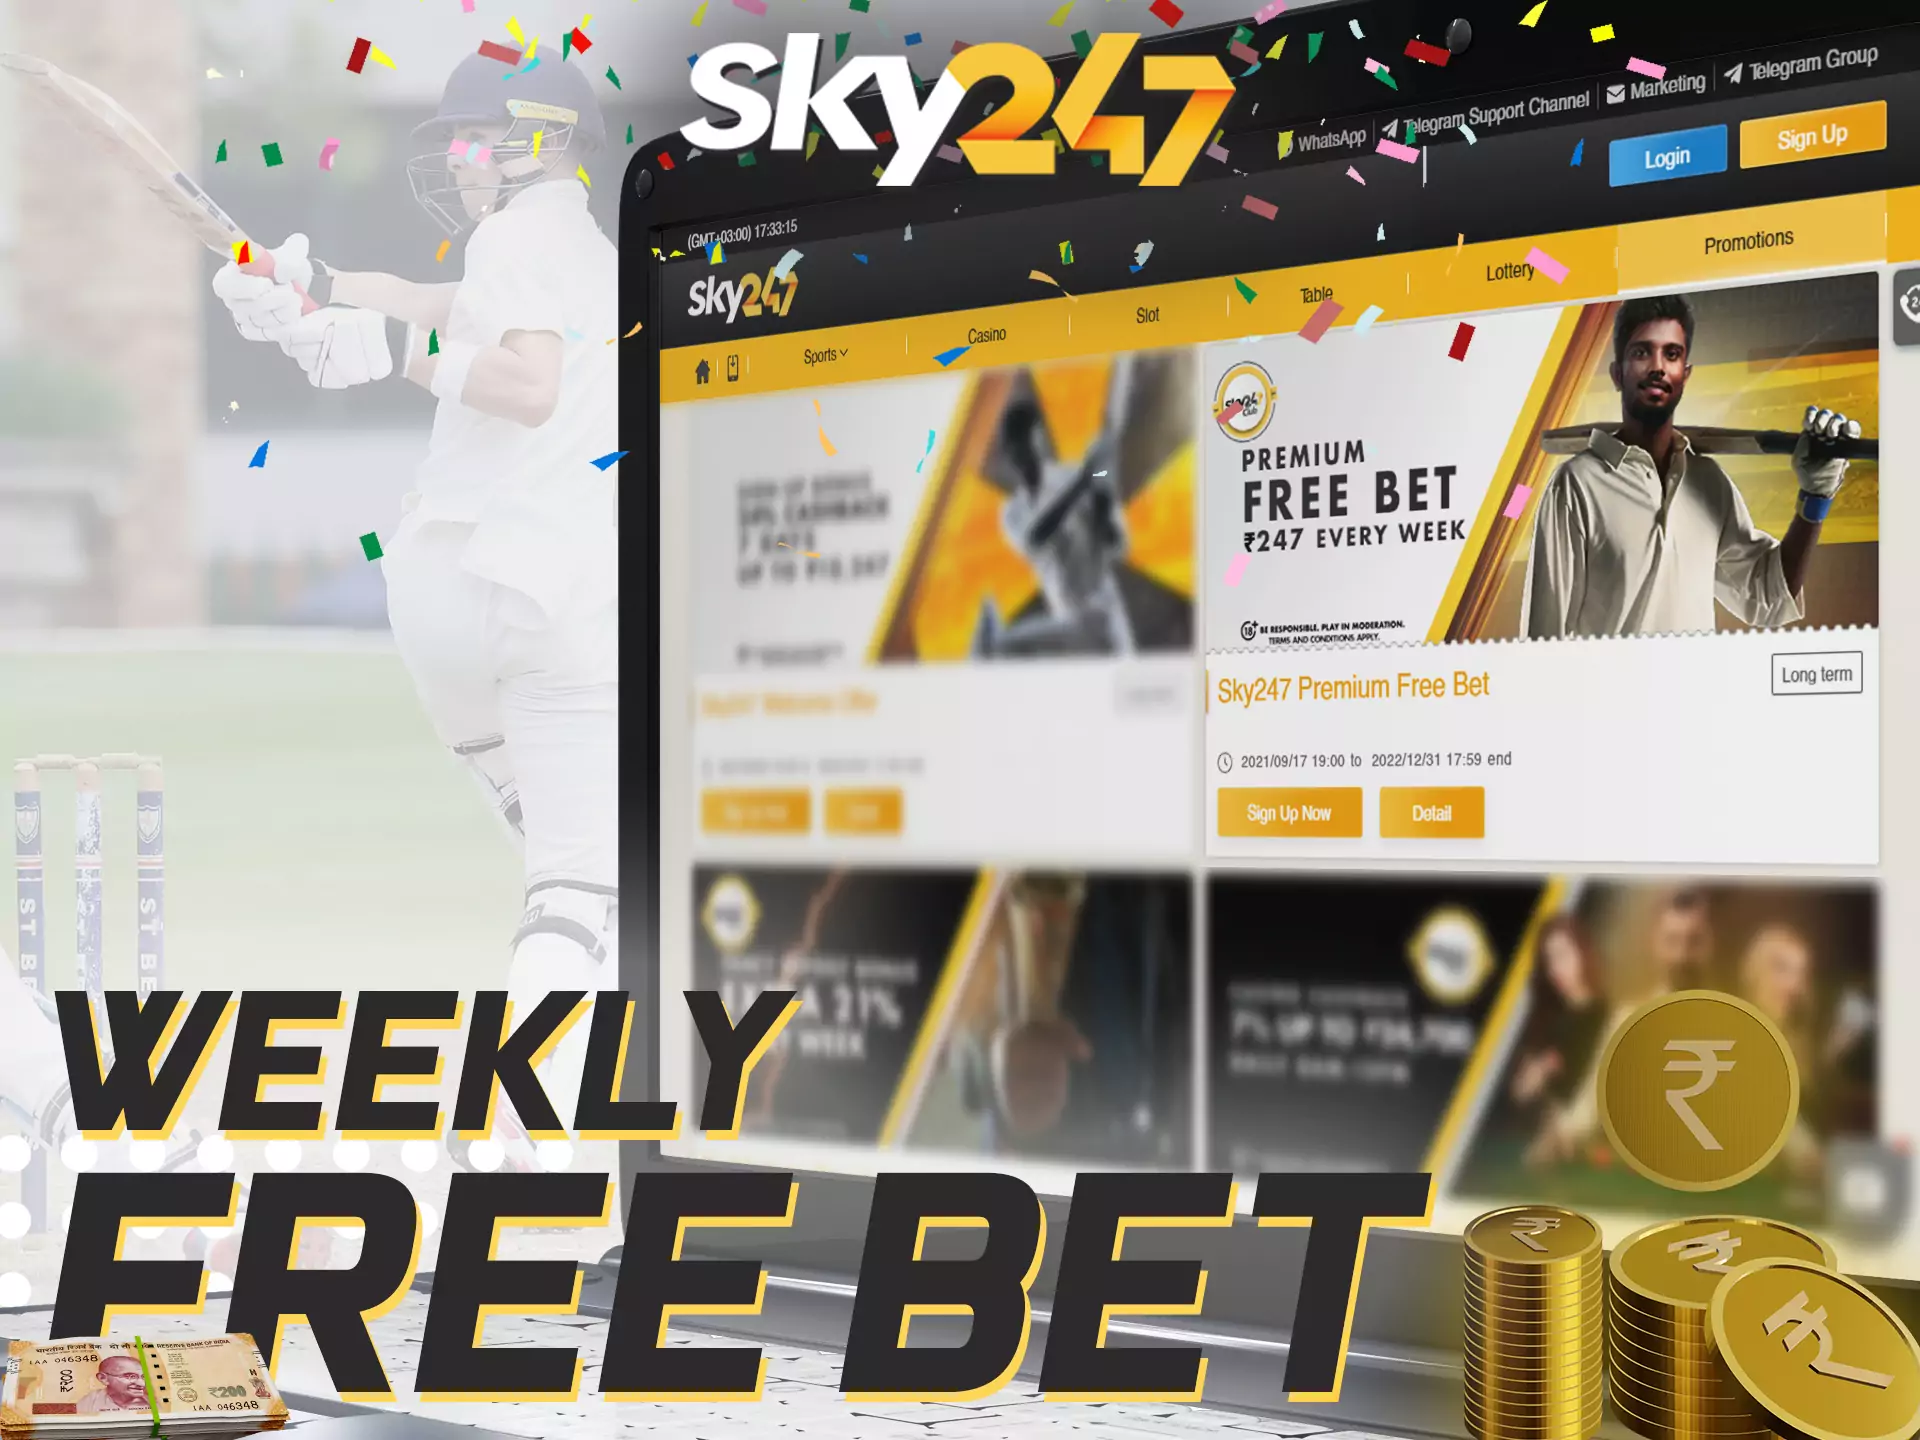 You can get additional bonuses every week on Sky247.